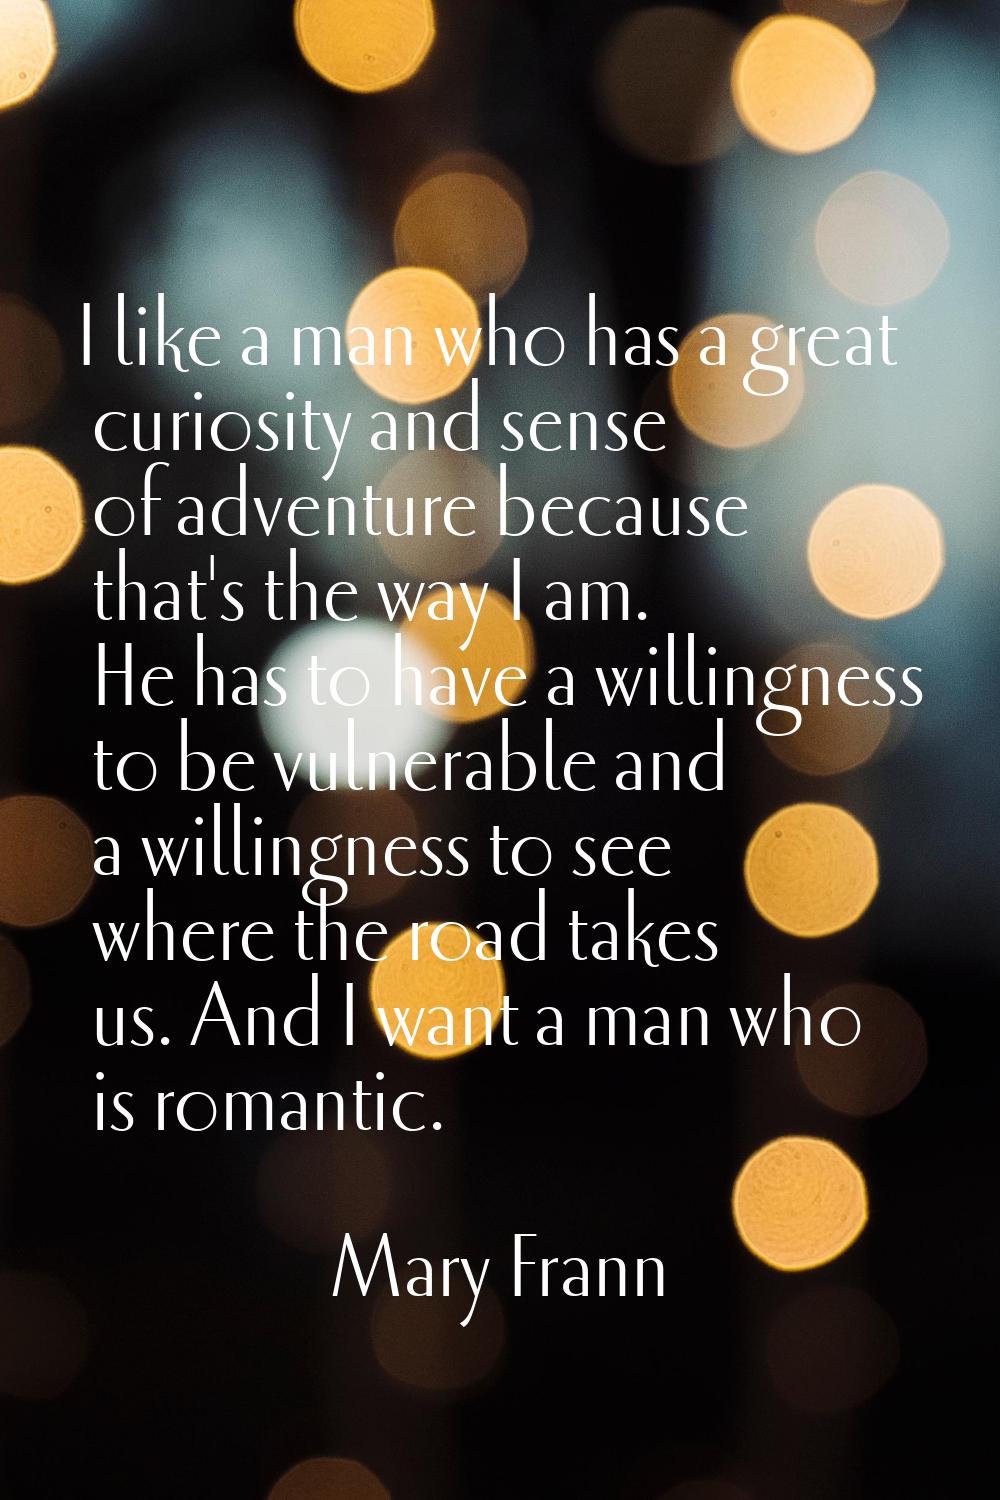 I like a man who has a great curiosity and sense of adventure because that's the way I am. He has t